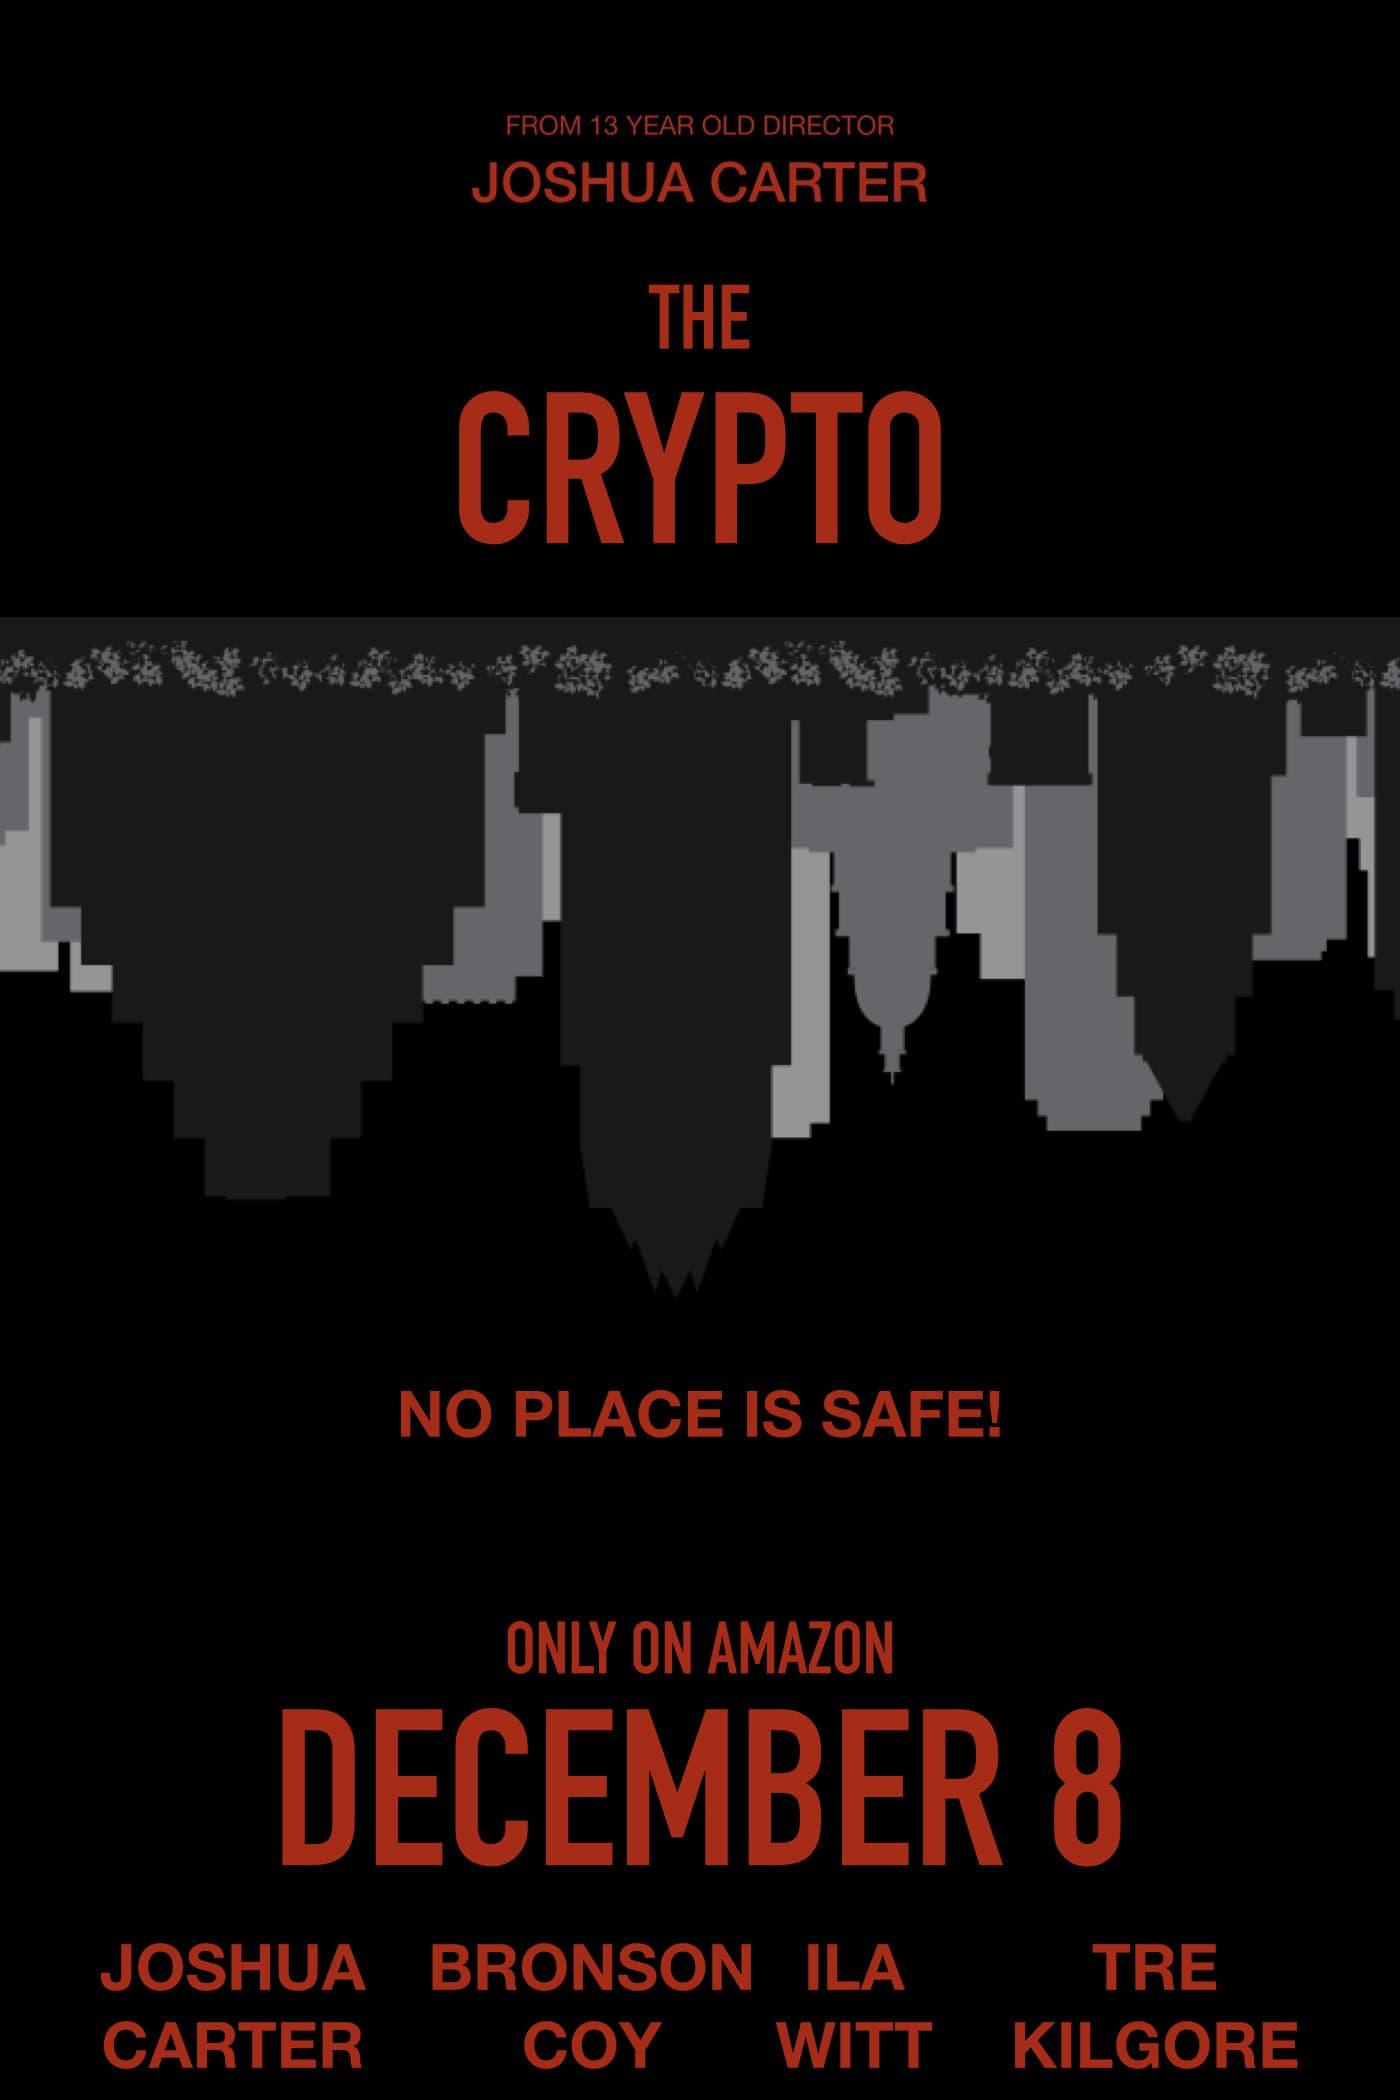 Poster for the movie "The Crypto"